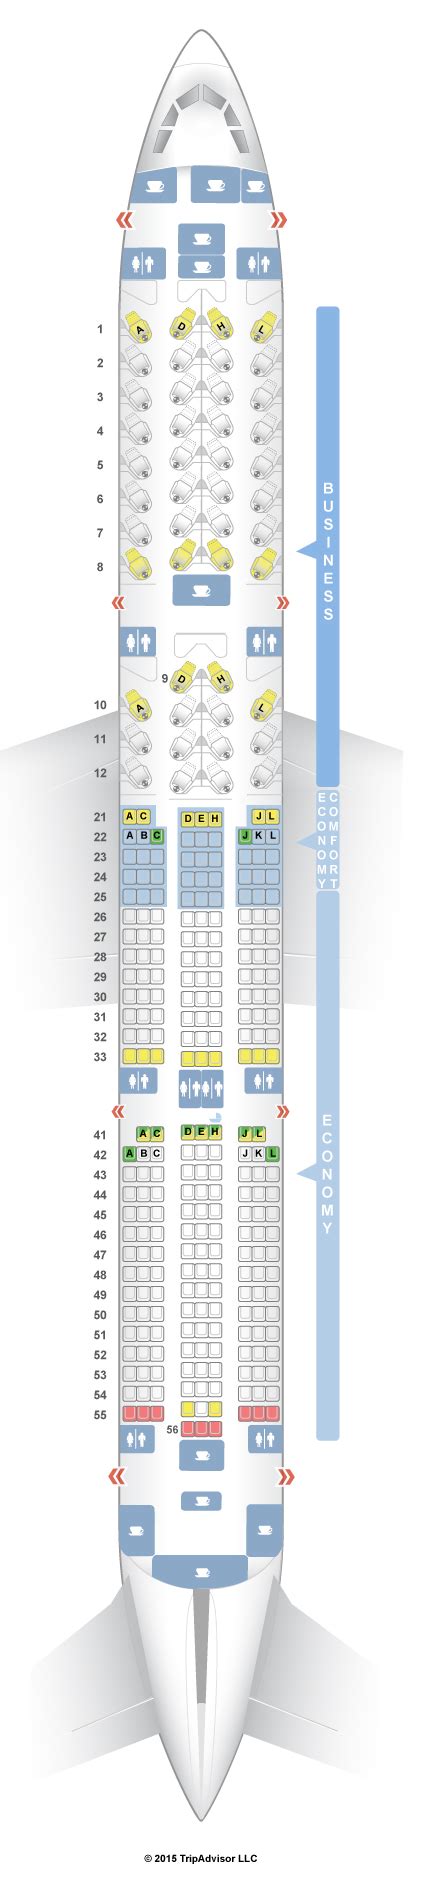 Seatguru airbus a350 900. The French bee Airbus A350-900 aircraft are configured with 35 recliner-style seats in Premium Class and 376 standard seats in Economy Class. All seats feature high-definition touchscreens for selecting audio and visual entertainment. Wi-Fi access is available via various purchase packages. 